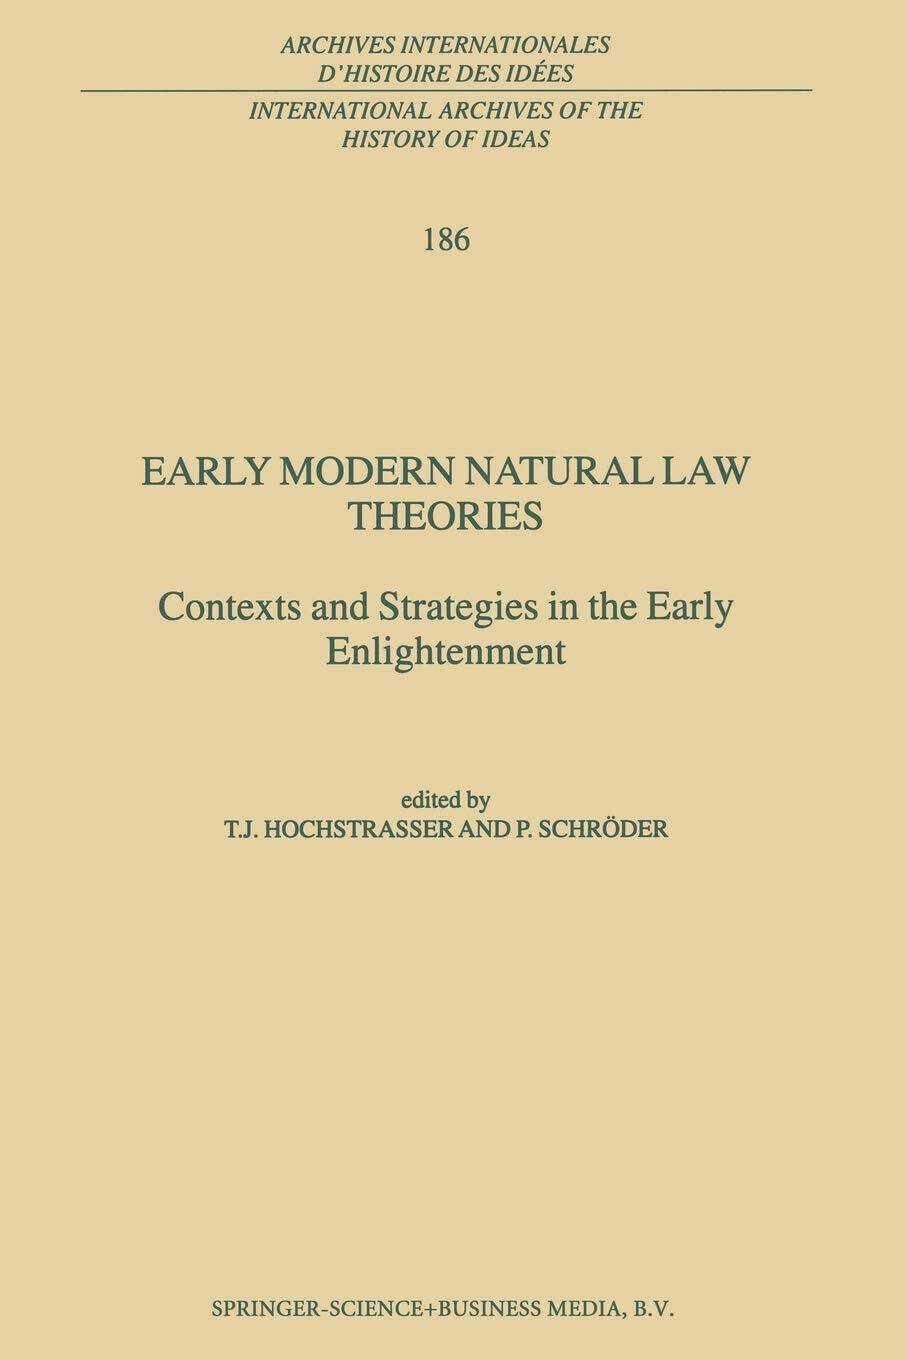 Early Modern Natural Law Theories - T. Hochstrasser - Springer, 2010